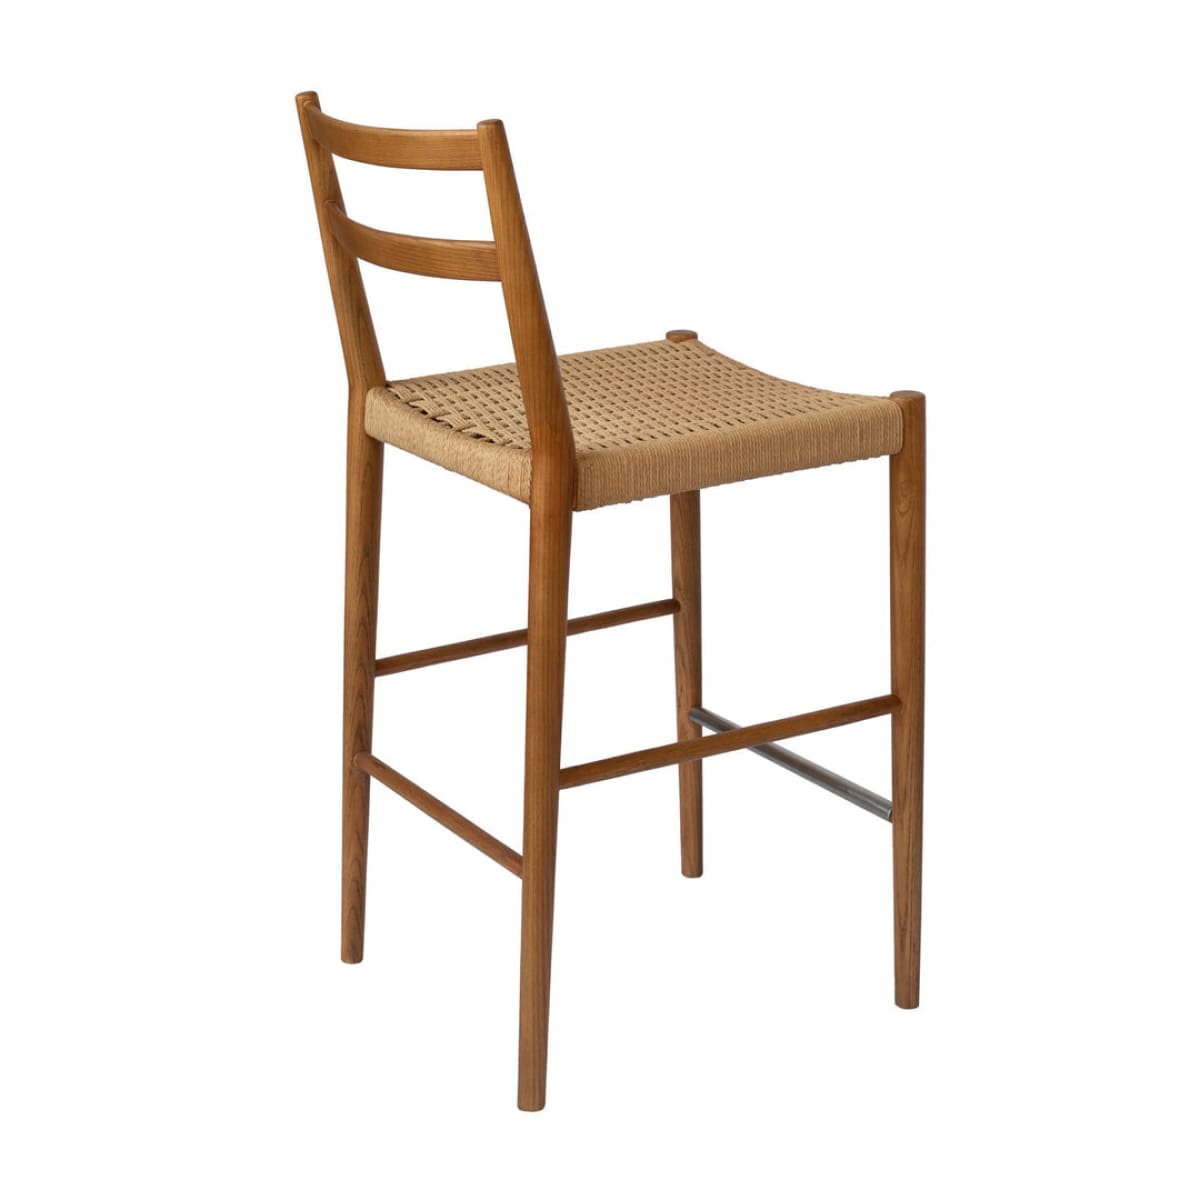 Jakarta Counter Stool With Back - Walnut/Natural Woven Seat - lh-import-stools